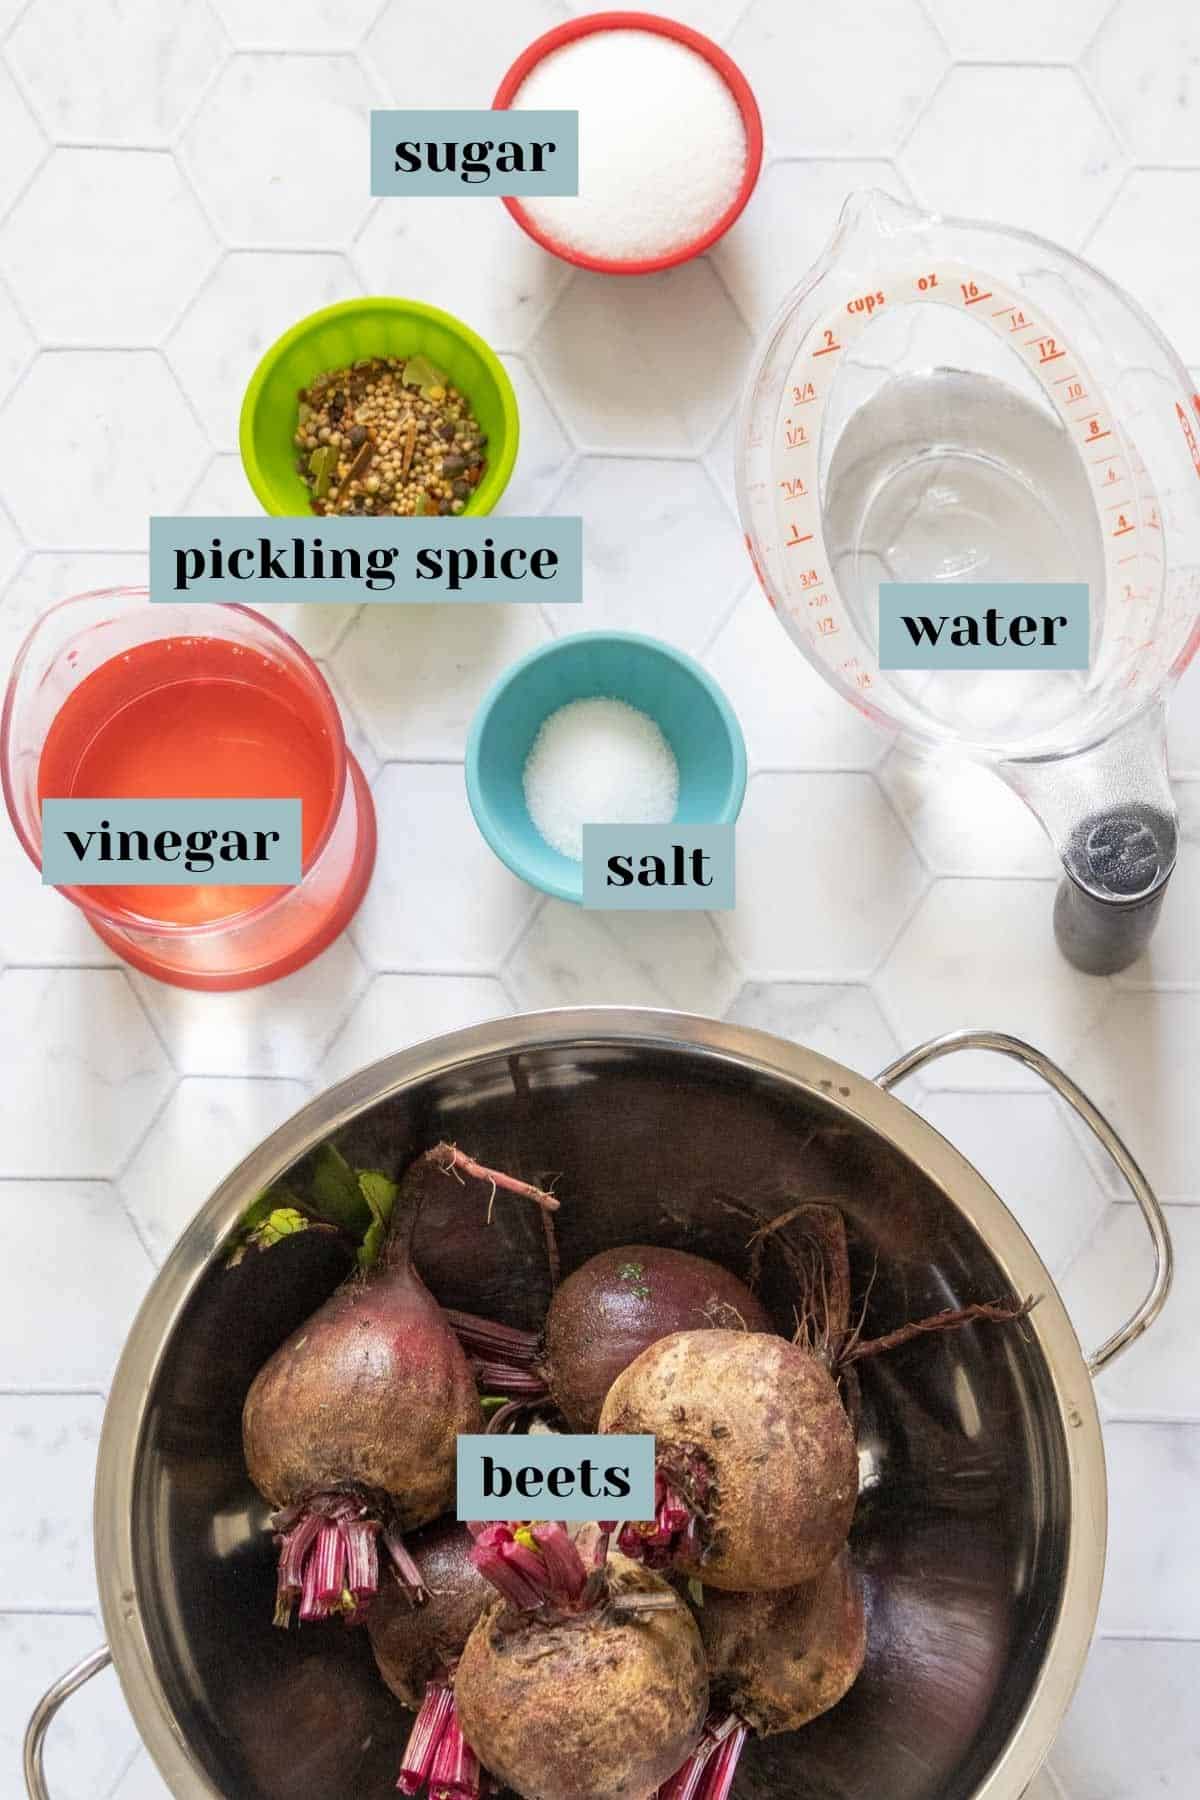 Ingredients for pickled beets on a tiled surface with labels.